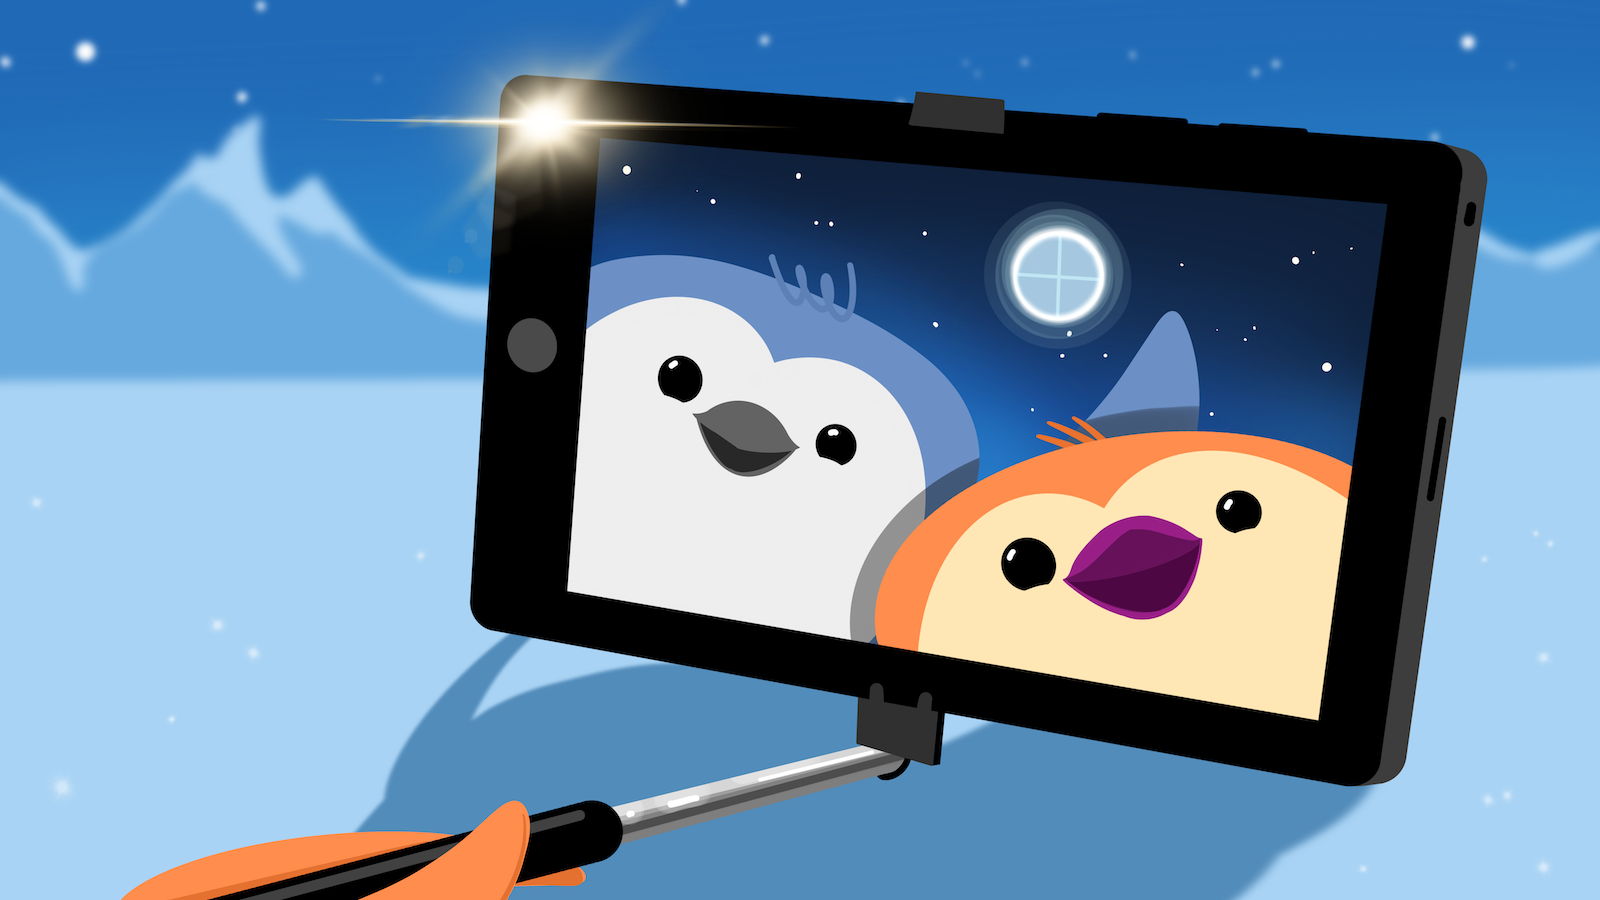 Illustration of two penguins, one blue and one orange, taking a selfie with a selfie stick. The moon in the background looks like the Quarto logo.